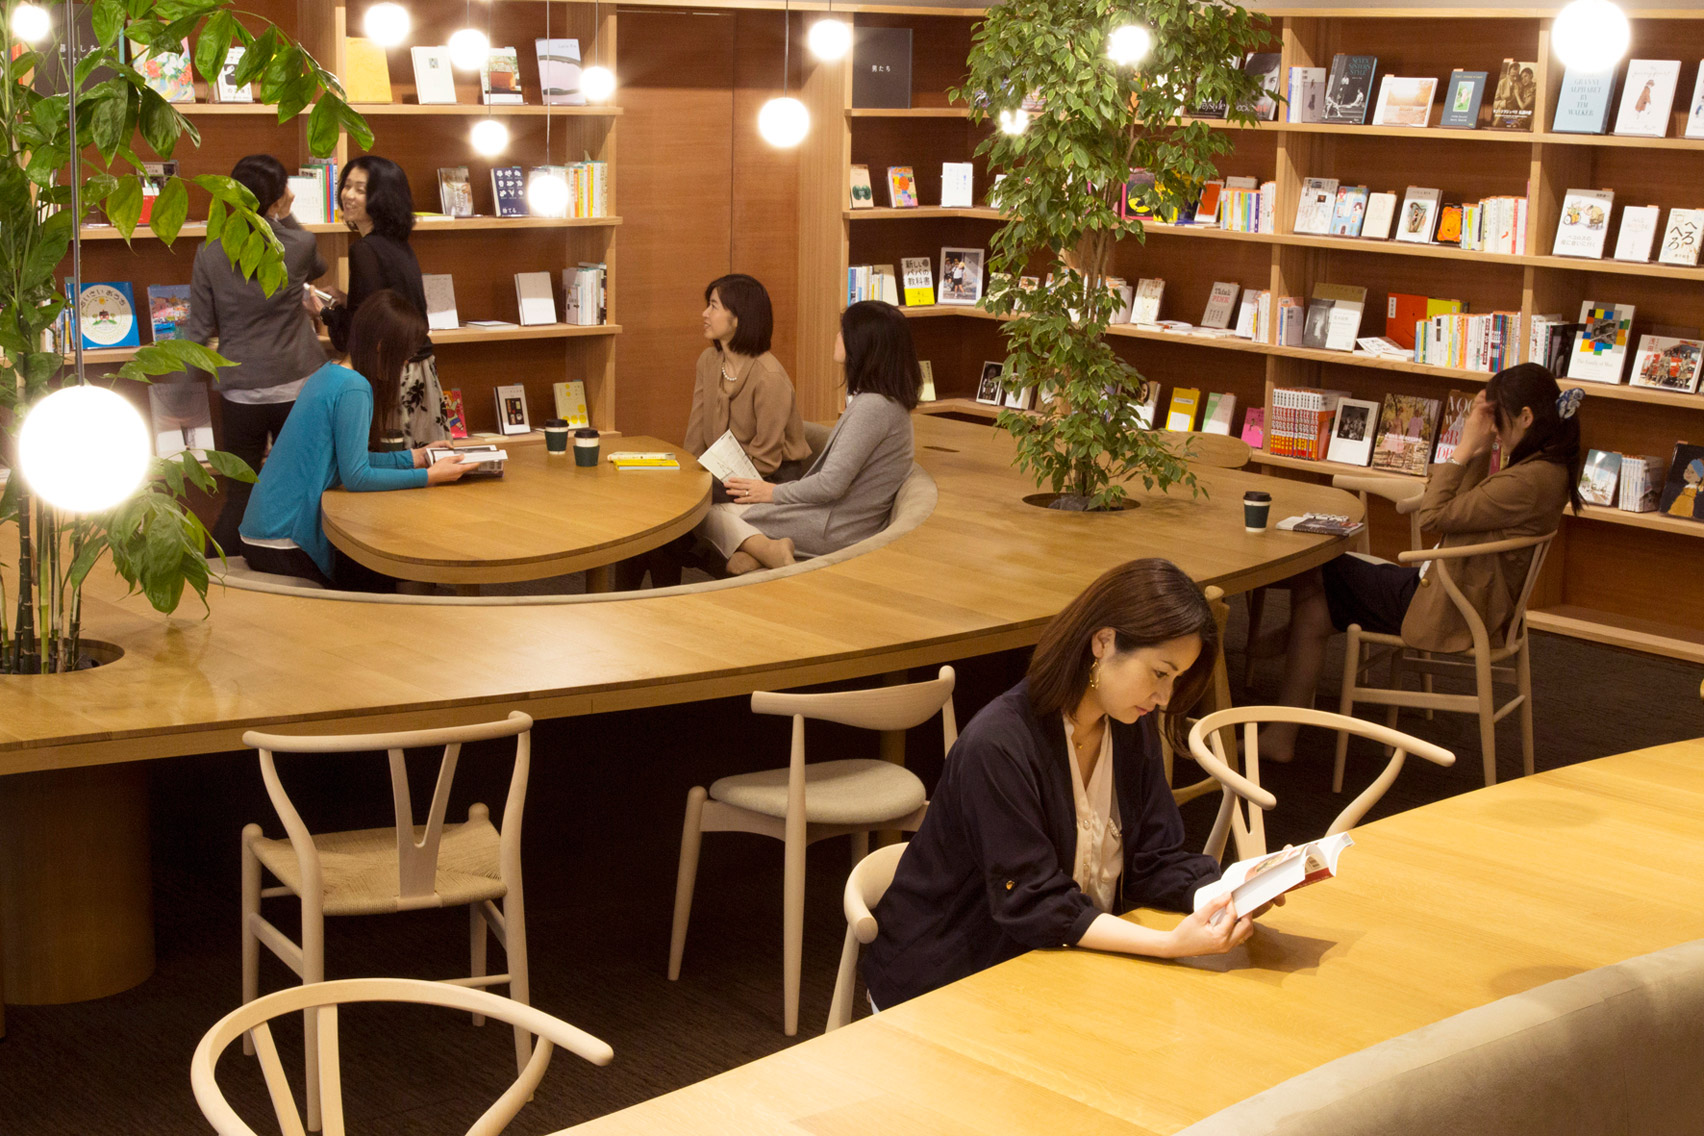 wil-womans-inspiration-library-japan-masa-architects-interiors_dezeen_1704_col_3